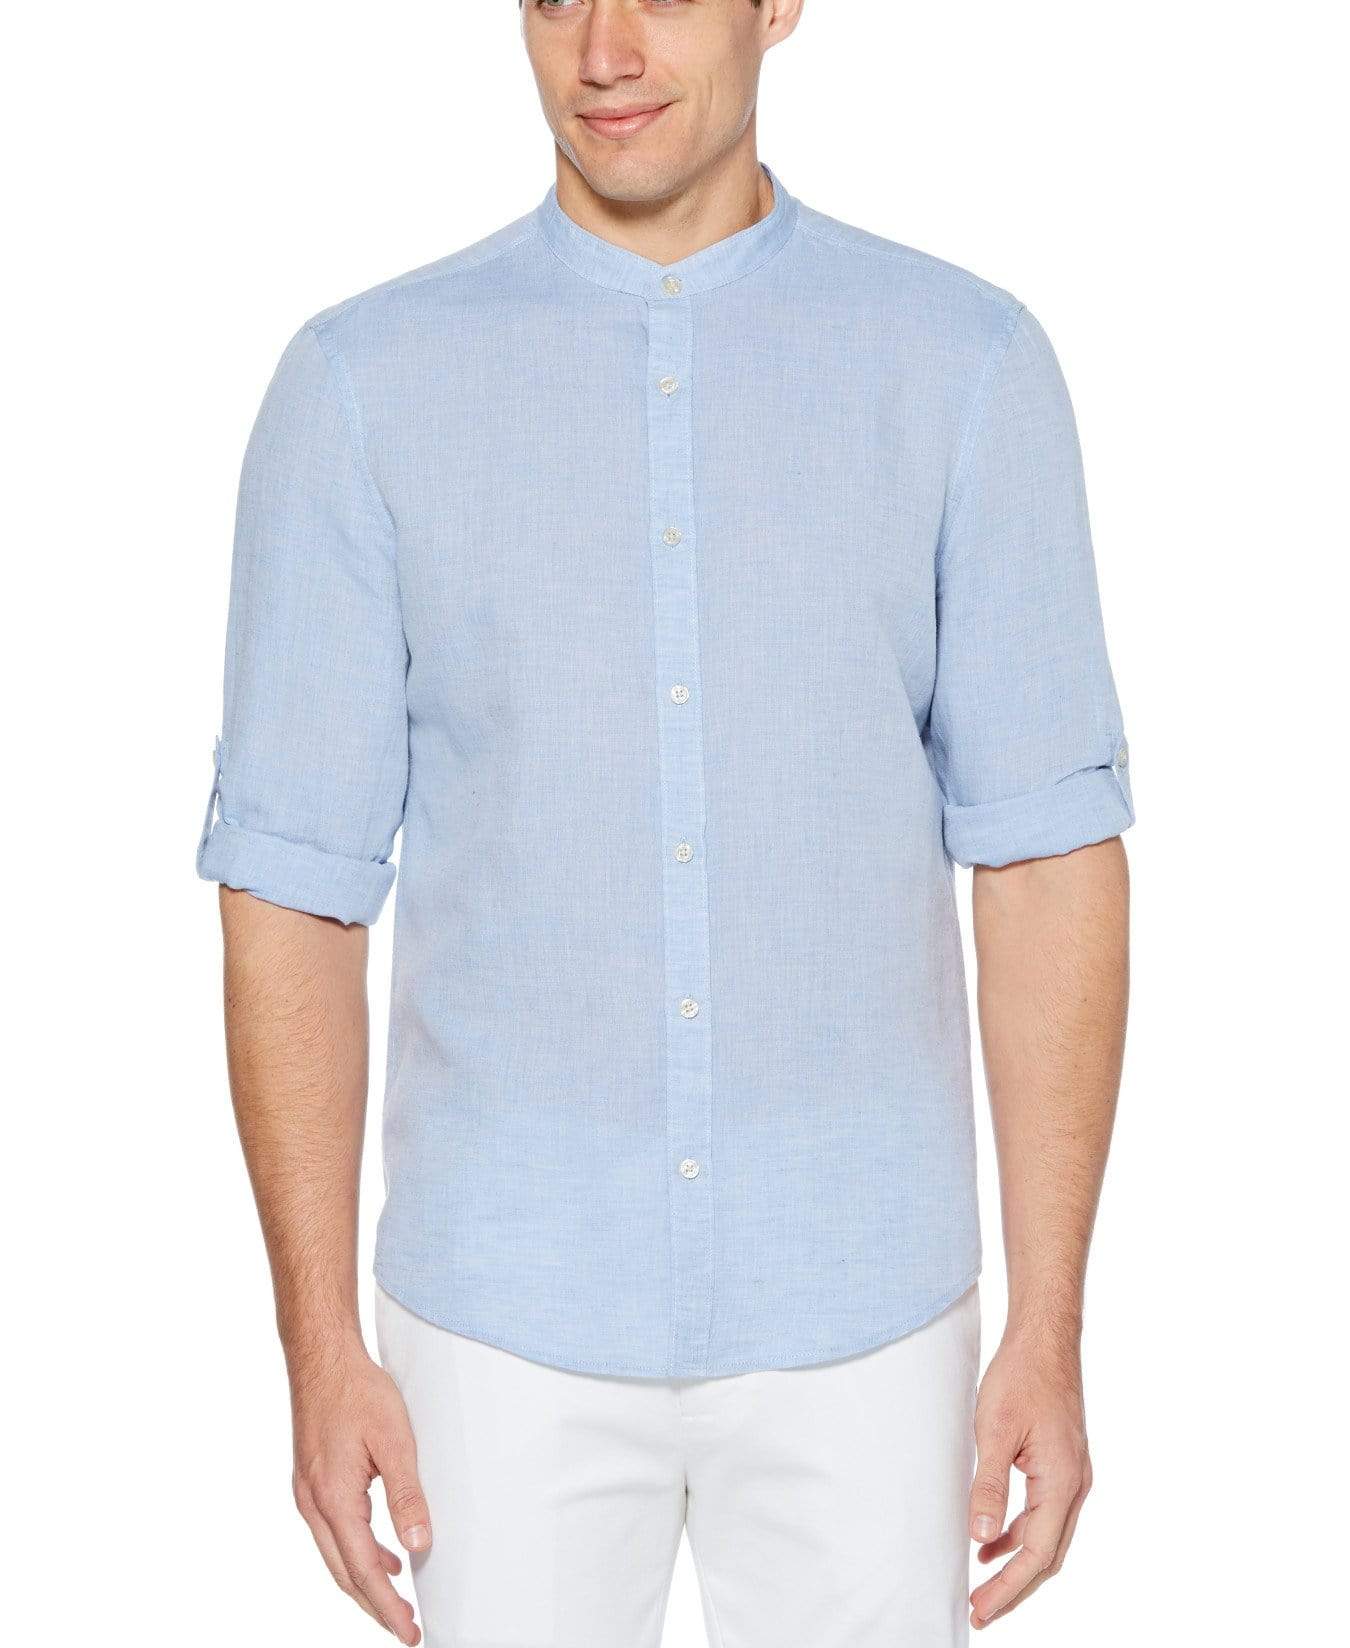 Linen Cotton Rolled Sleeve Banded Collar Shirt